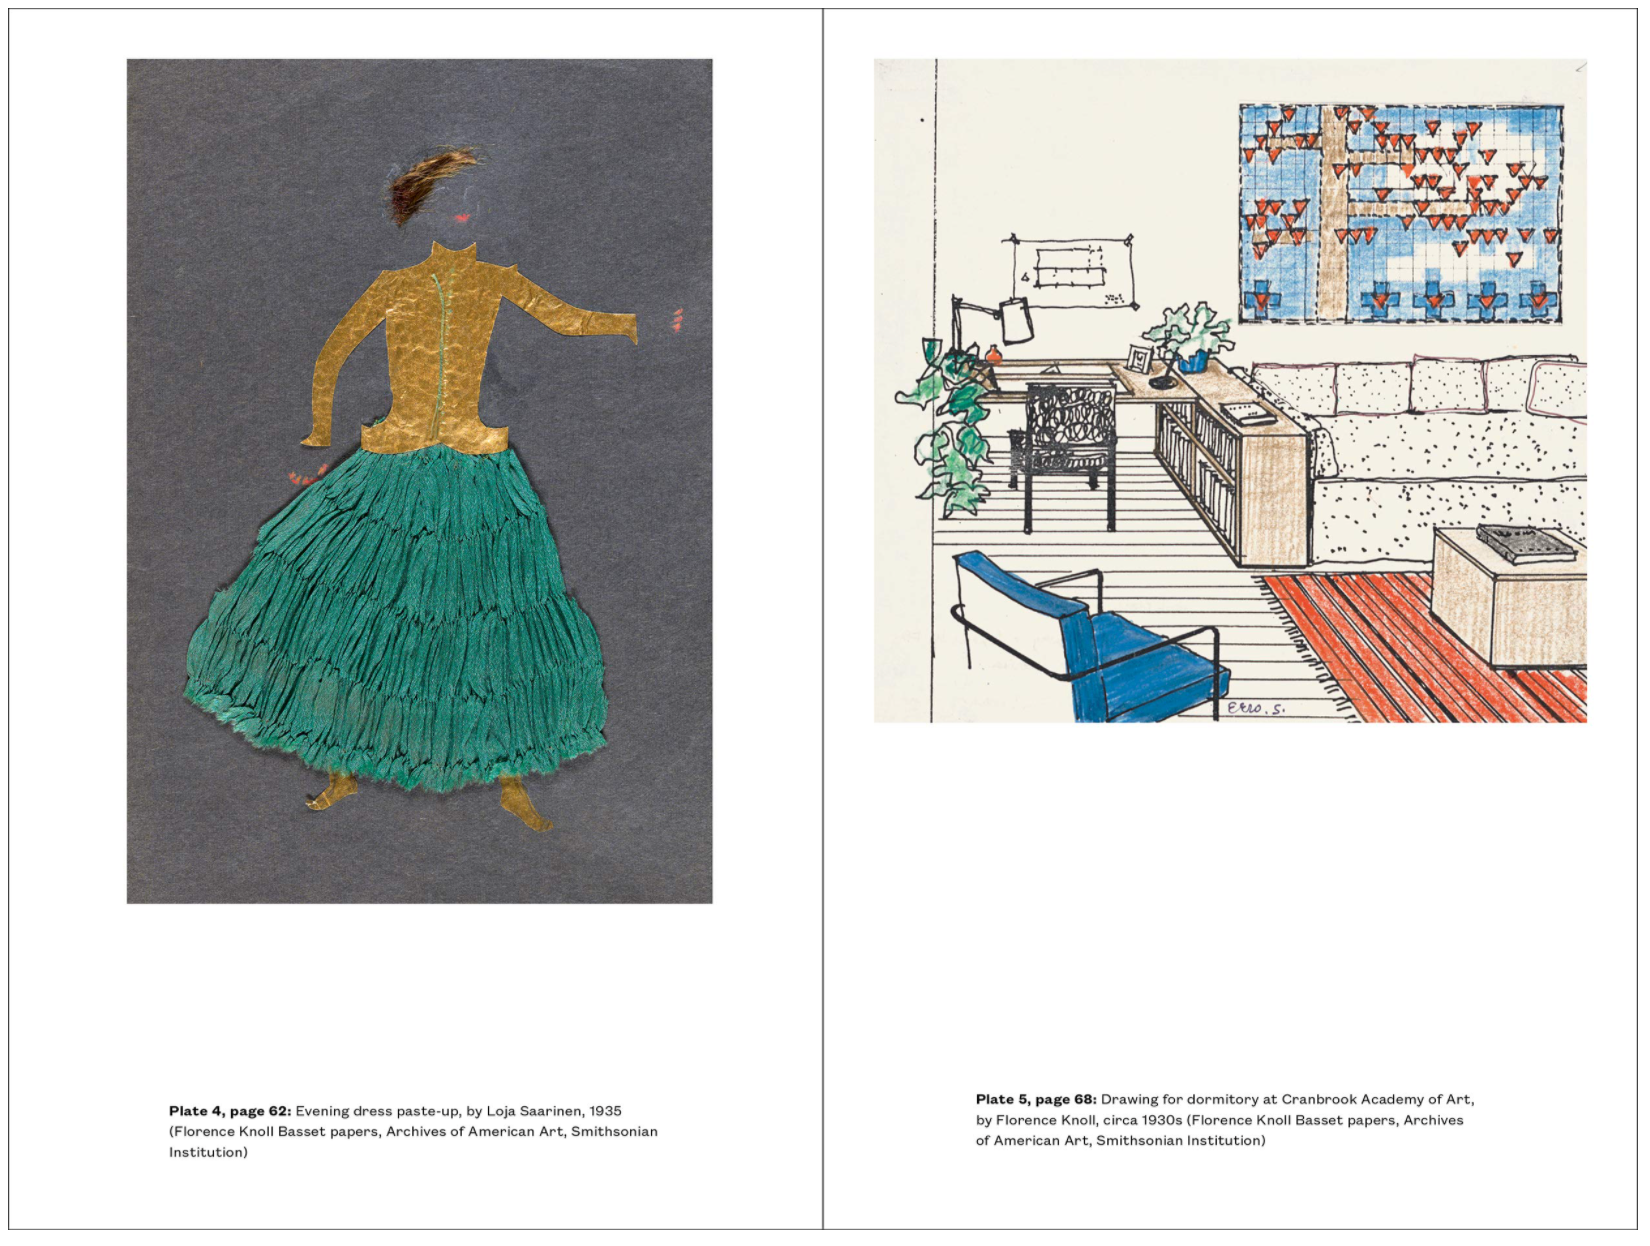 Inside page from ‘No Compromise: The Work of Florence Knoll’ featuring dress paste up and drawing